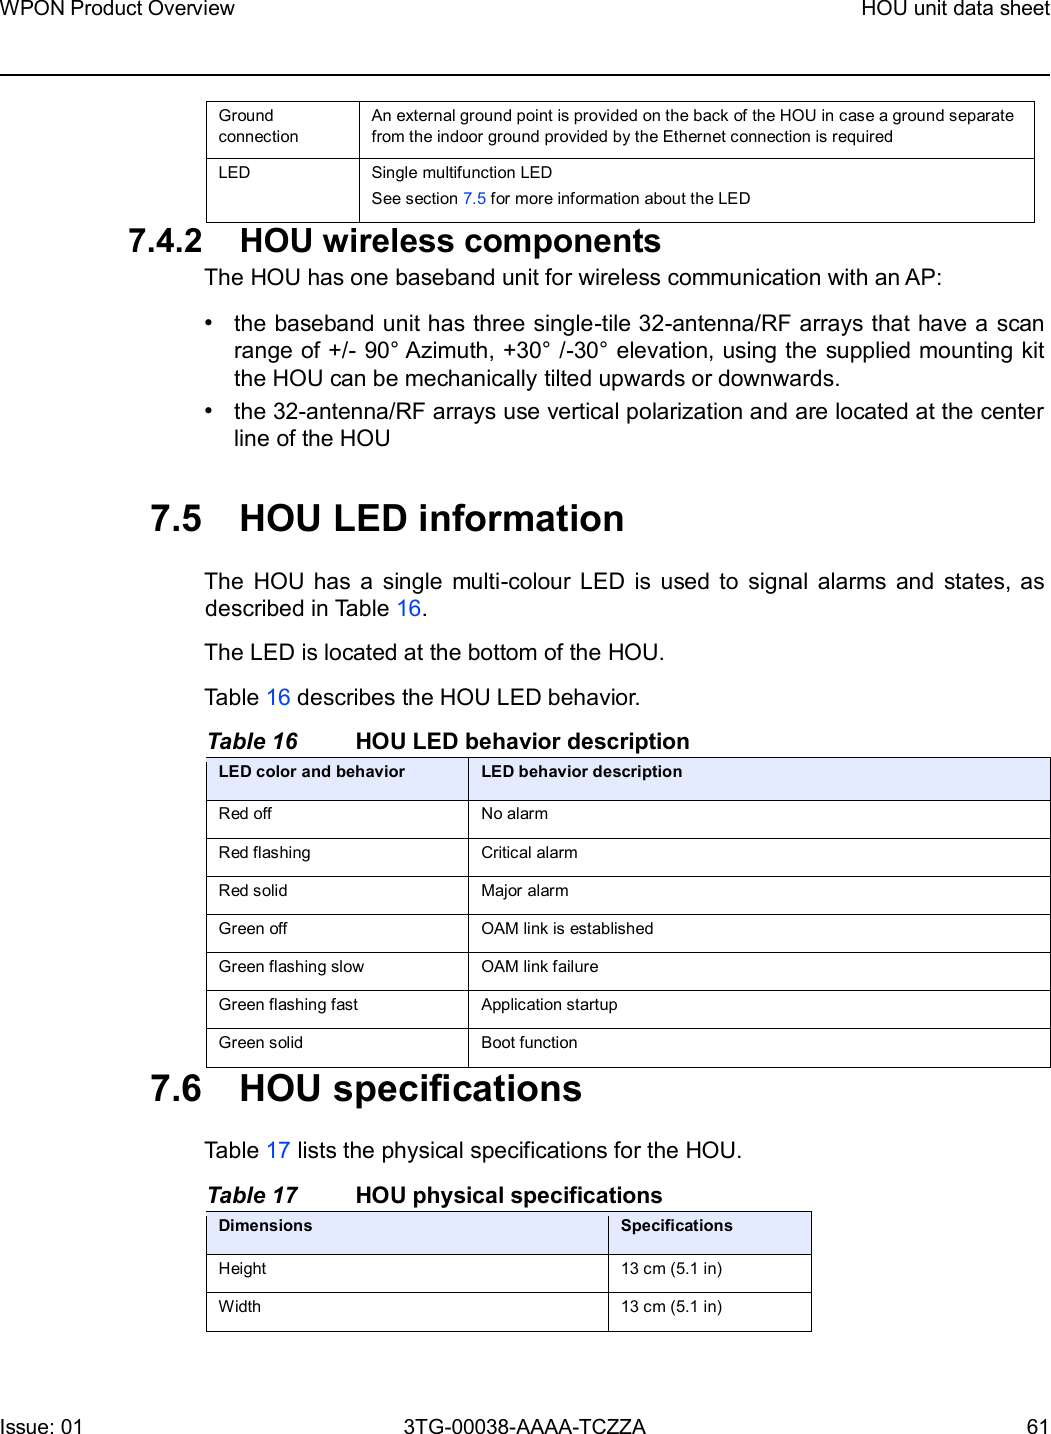 Page 61 of Nokia Bell 7577WPONAPAC WPON User Manual WPON Product Overview